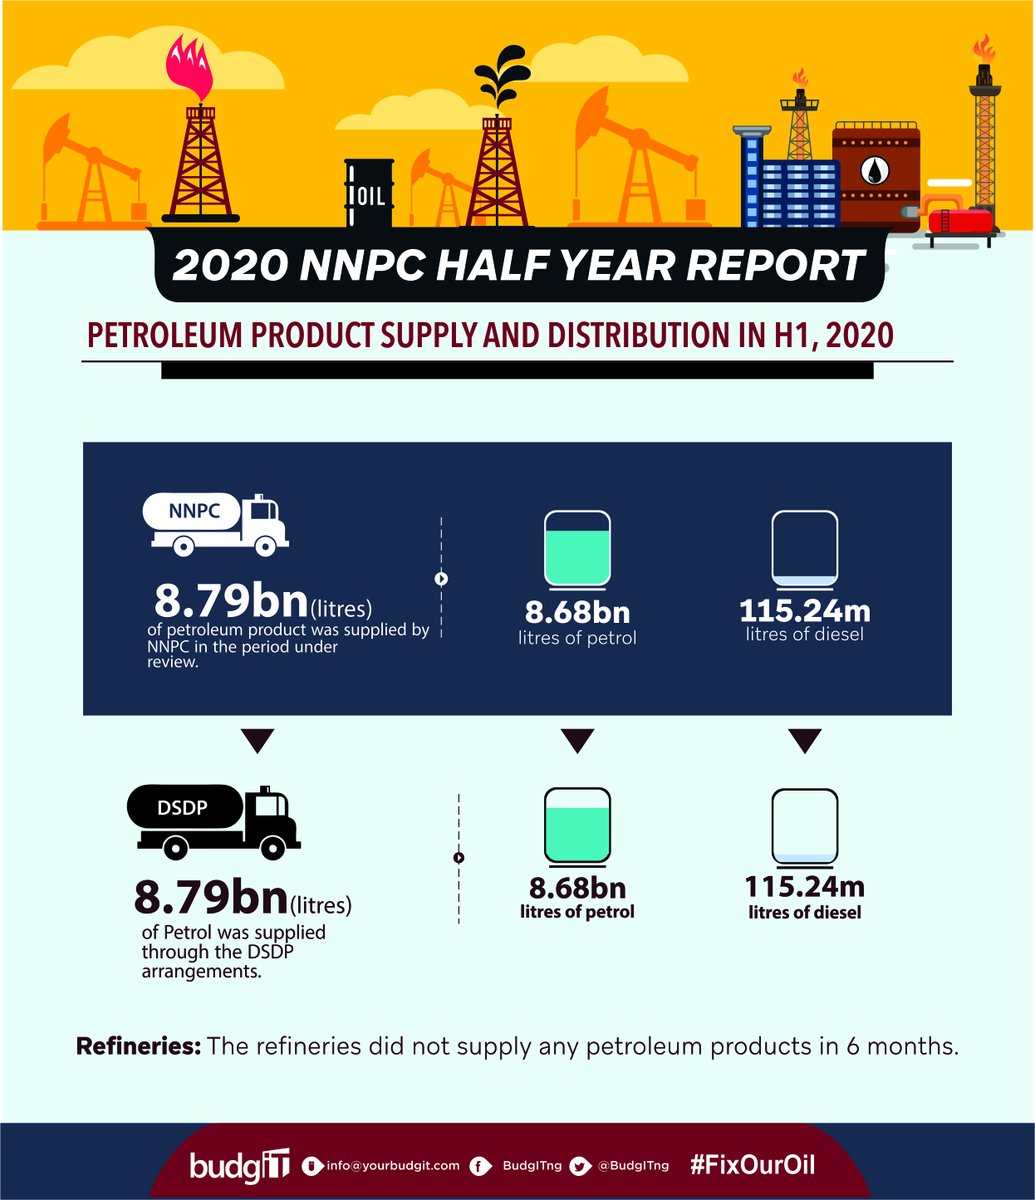 A total of 8.79 billion litres of petroleum products was supplied by NNPC through Direct Sales Direct Purchase (DSDP) in H1 2020 while 7.87 billion litres of white products were sold. #FixOurOil